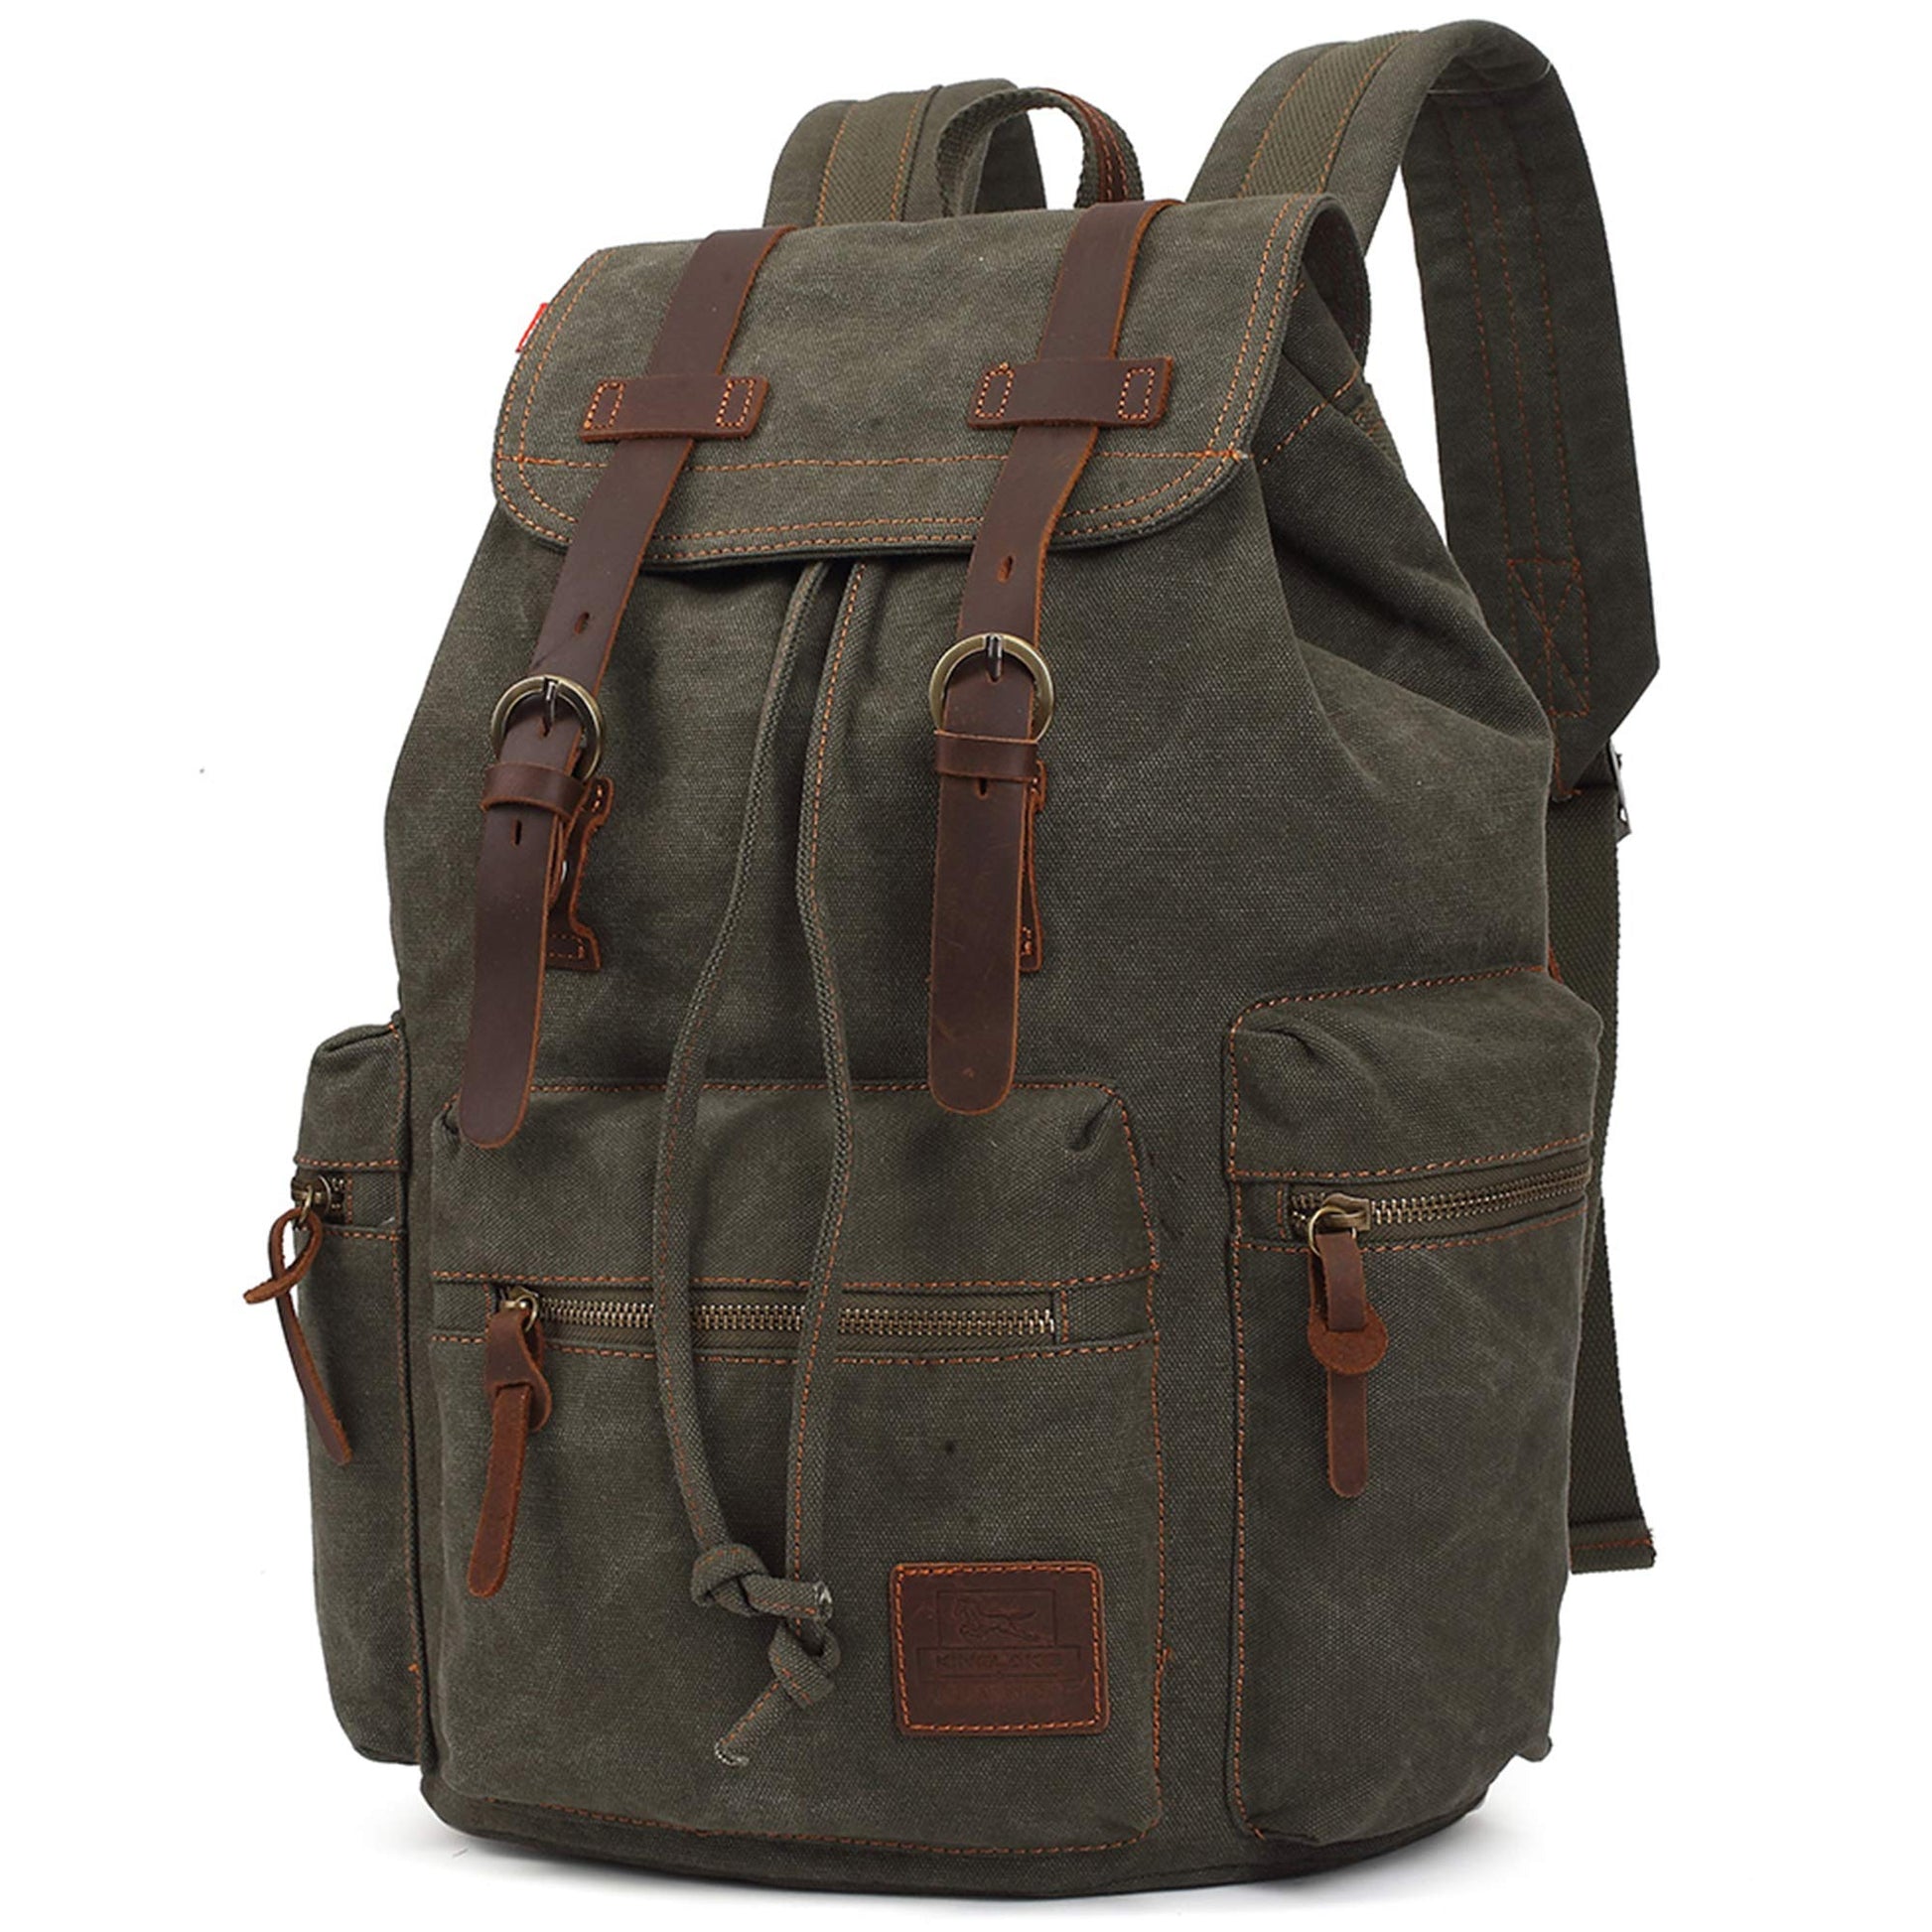 KAUKKO Vintage Casual Canvas and Leather Rucksack Backpack